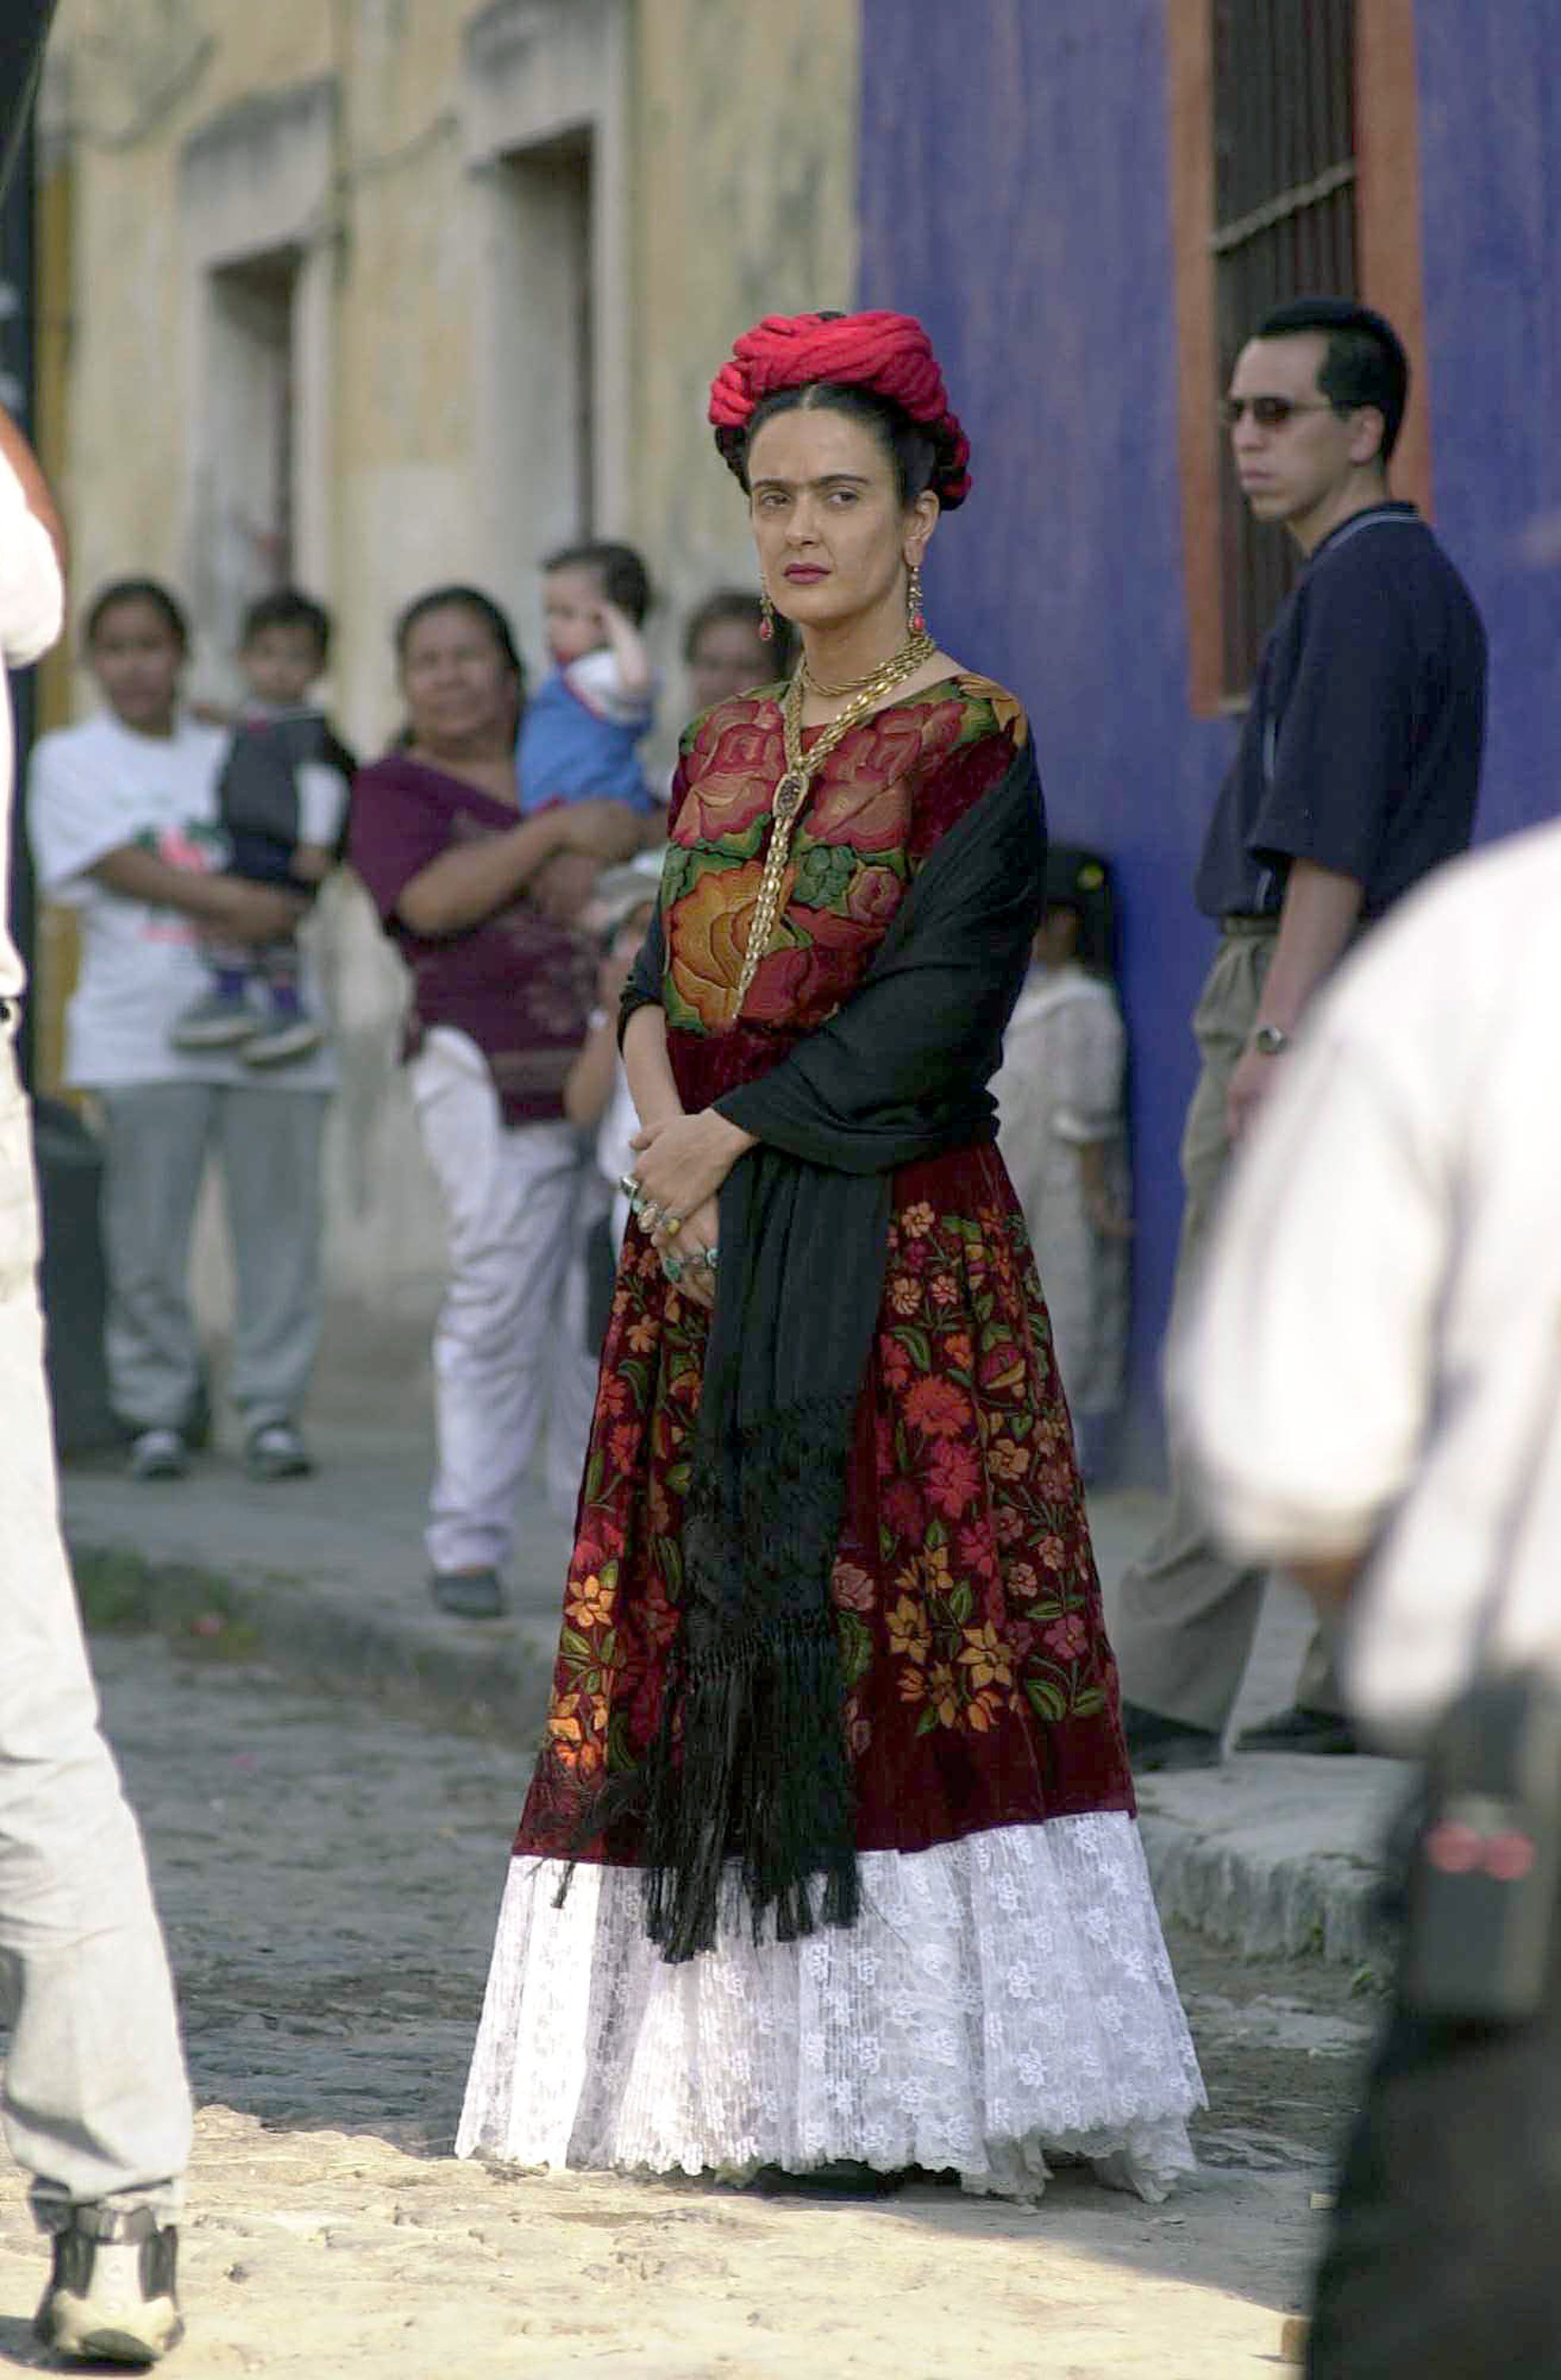 387854 02: Mexican actress Salma Hayek performs in a scene on the set of the film 